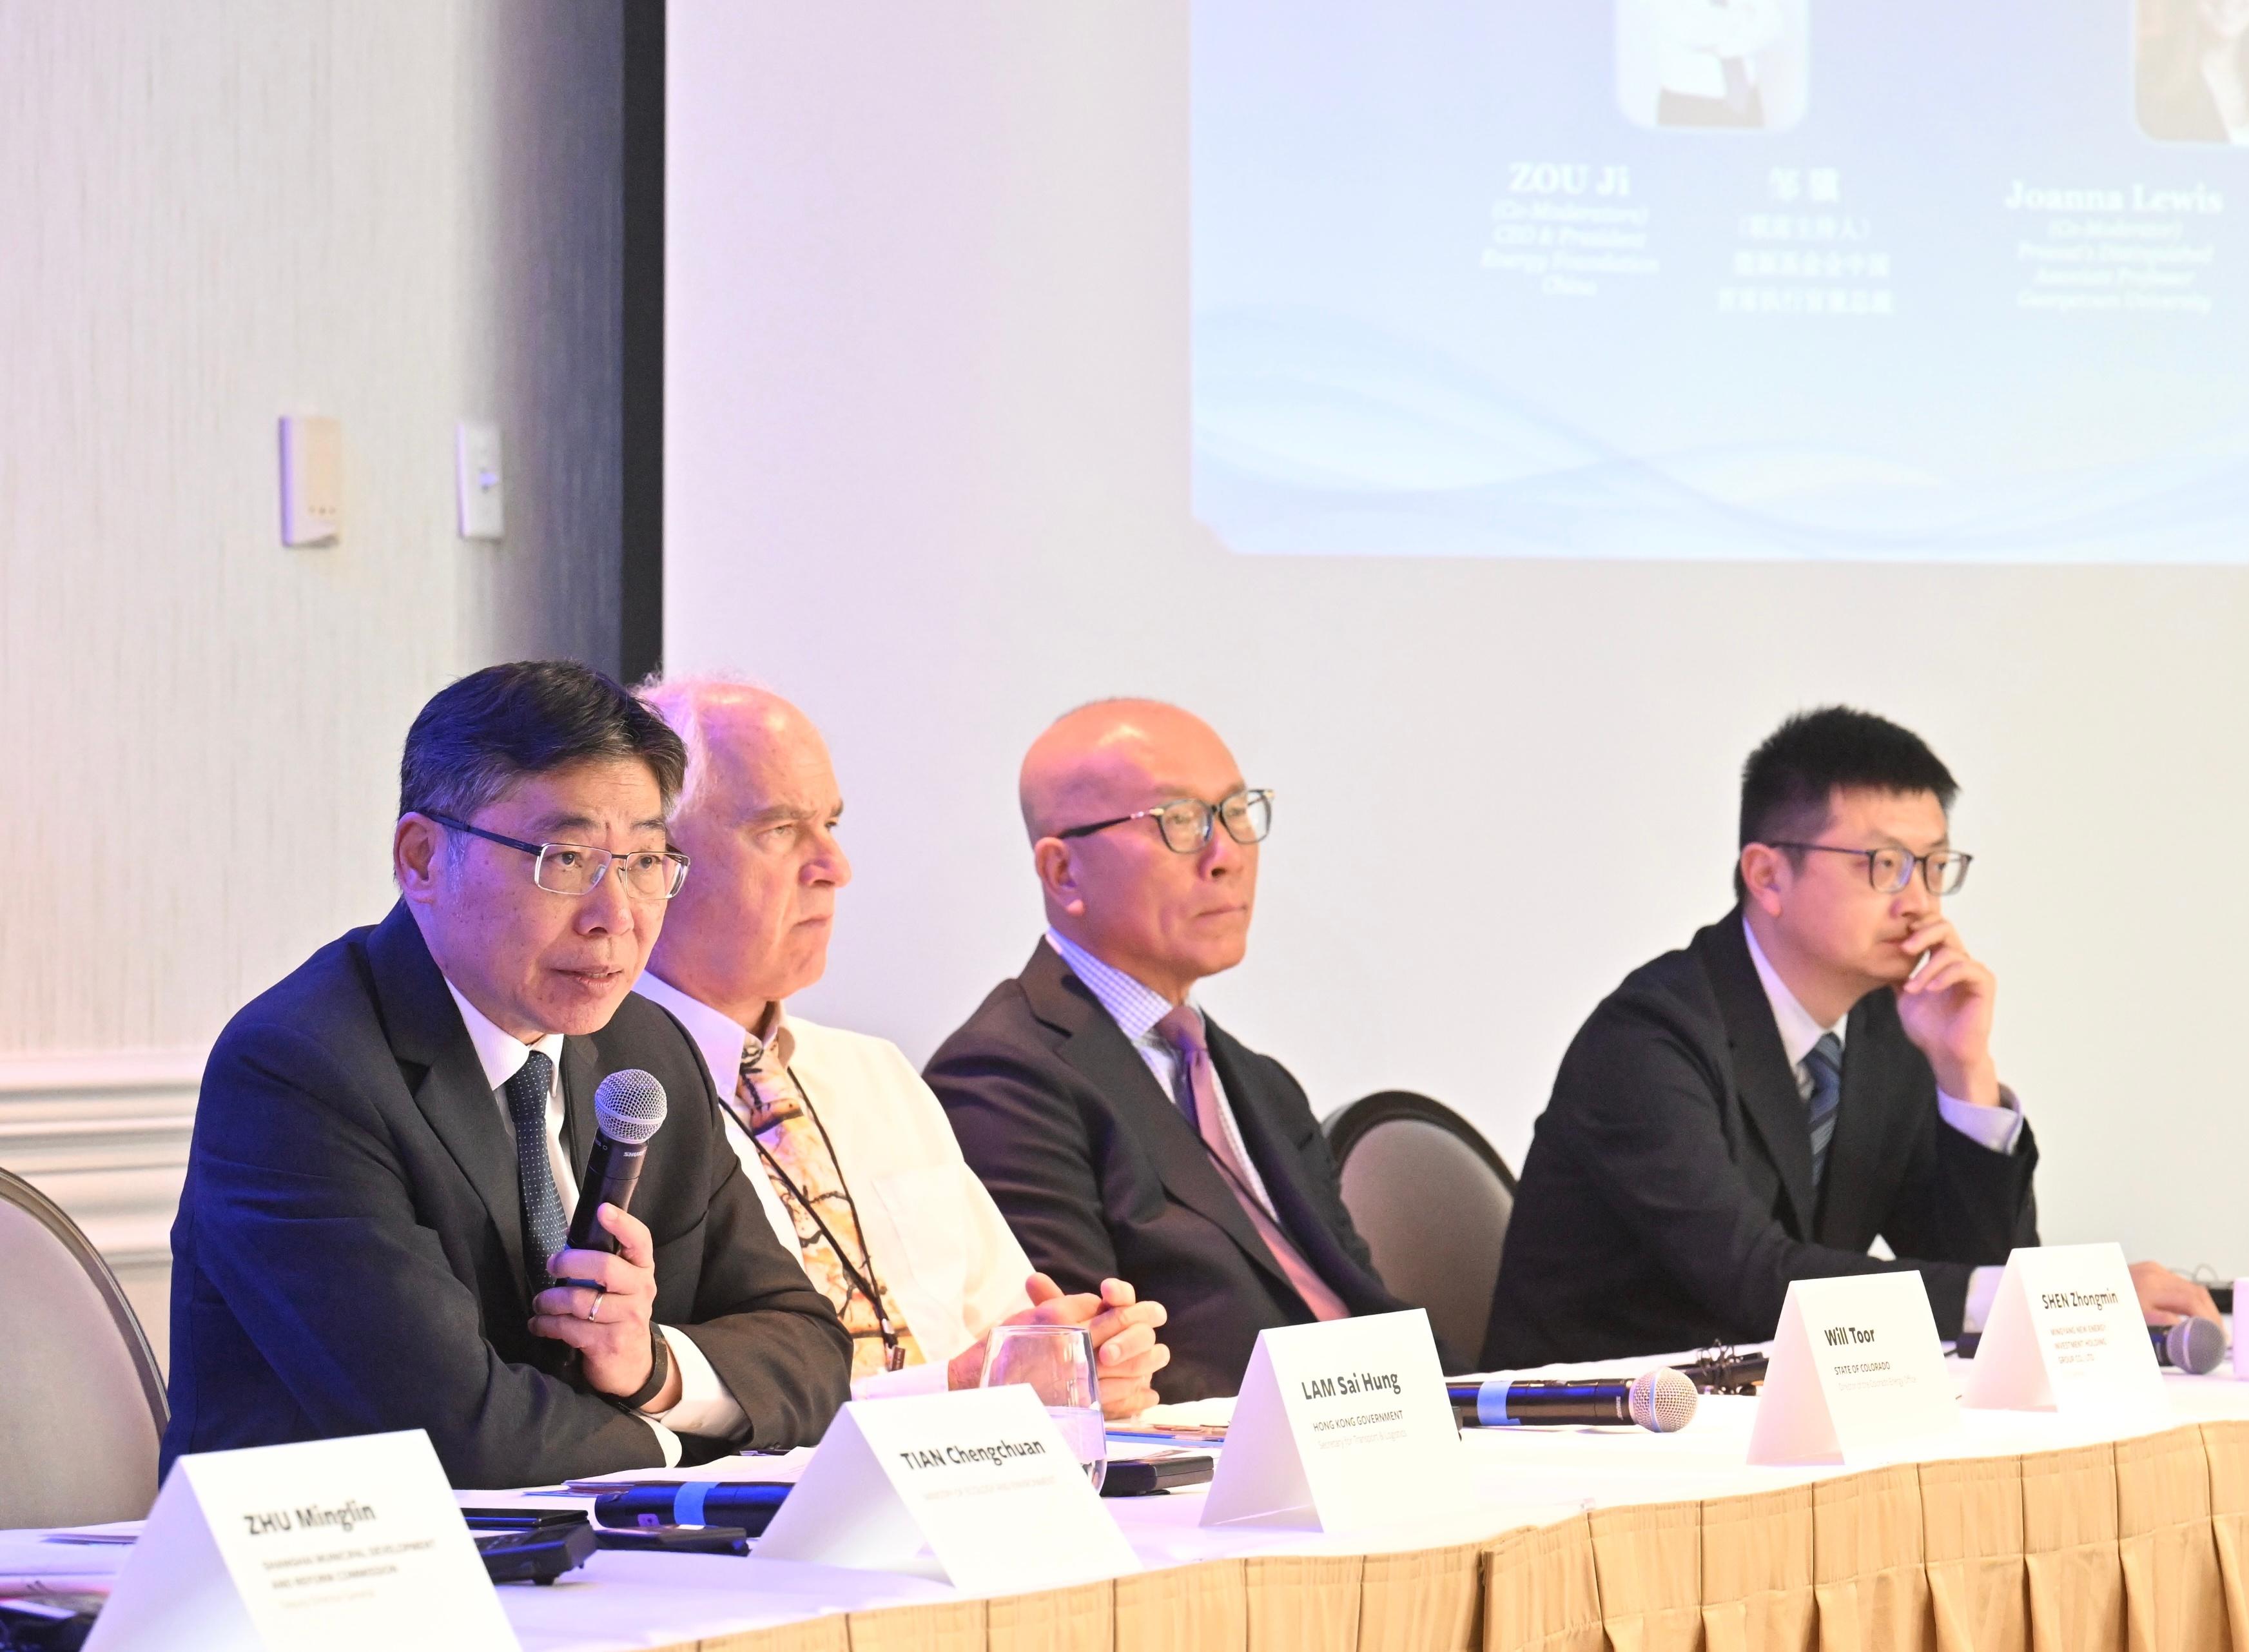 The Secretary for Transport and Logistics, Mr Lam Sai-hung (first left), delivered a keynote speech at a roundtable of the US-China High-Level Event on Subnational Climate Action in Berkeley, the United States, on May 29 (California time).